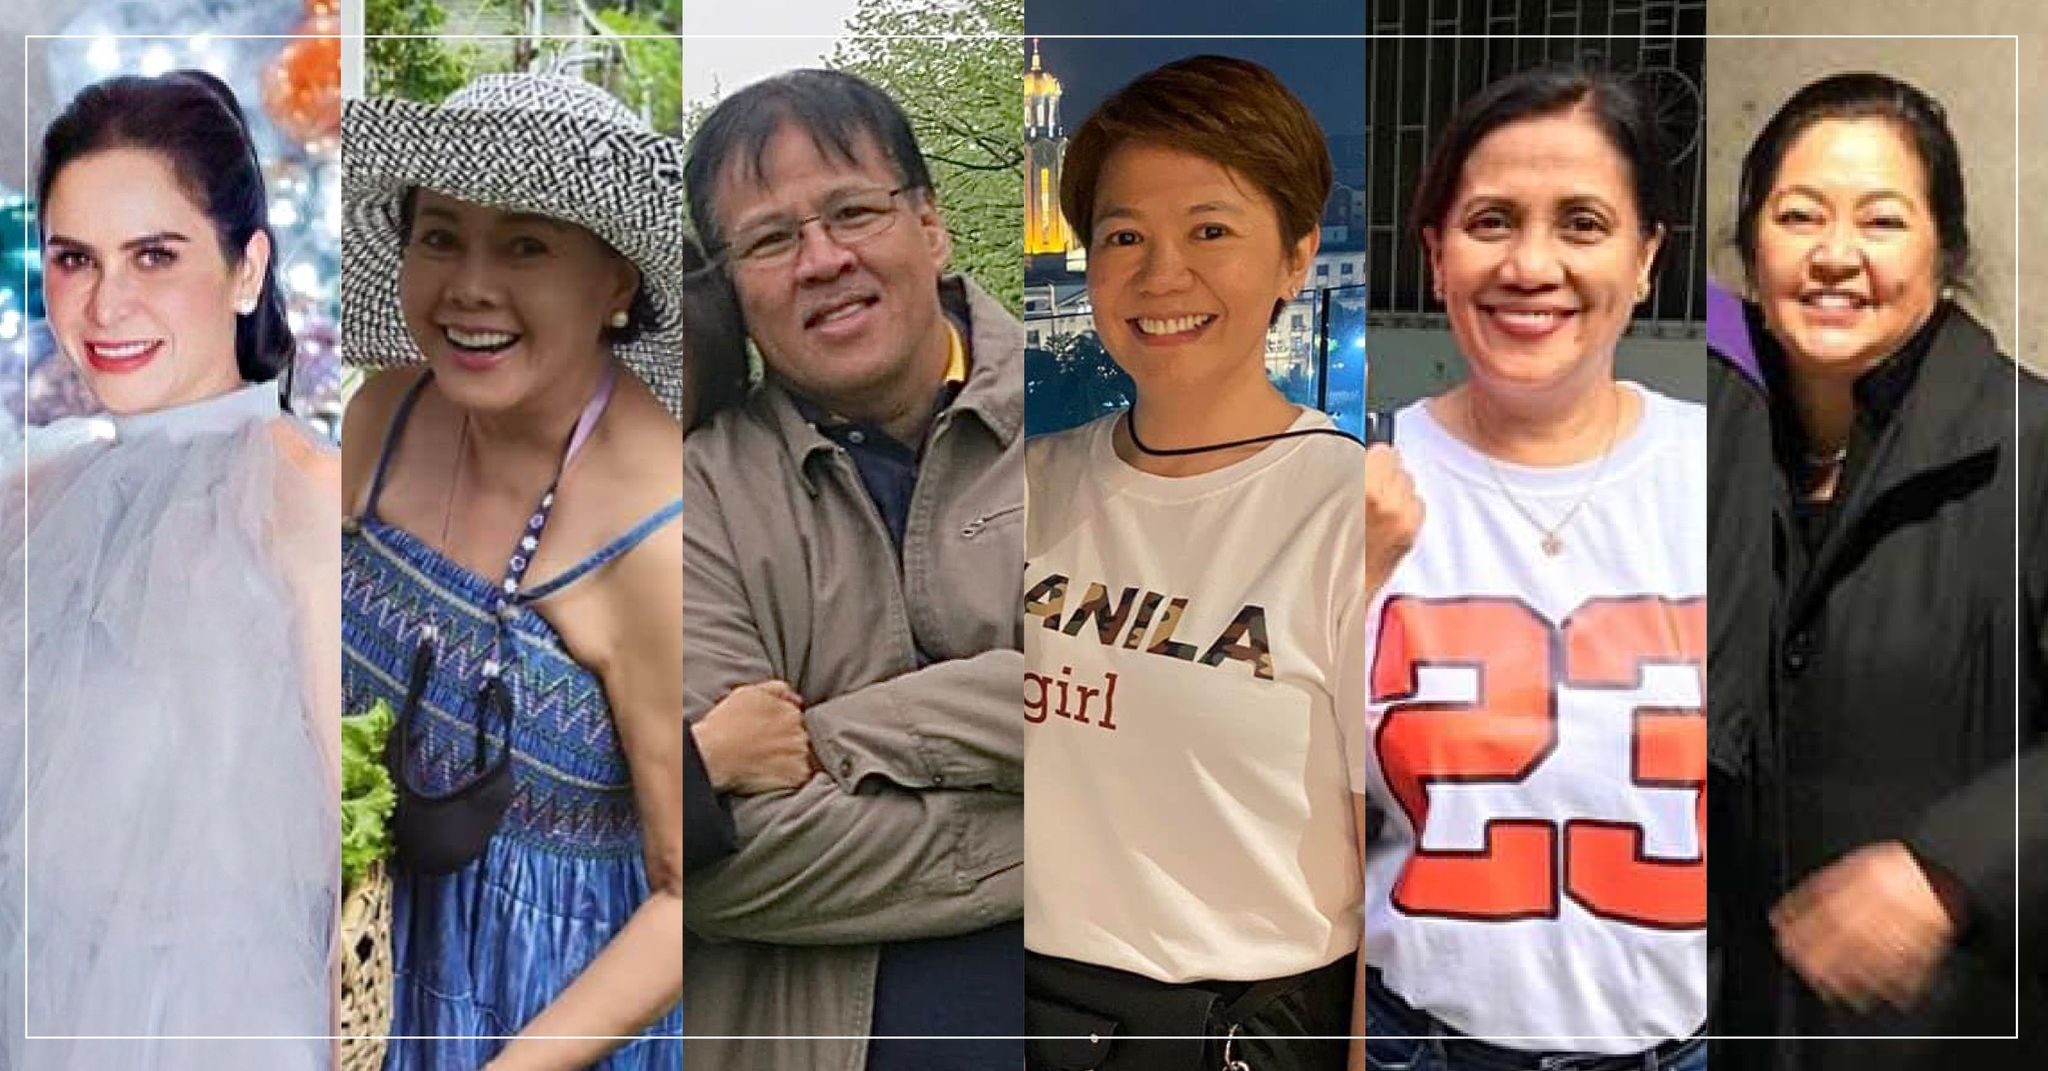 Meet the ladies (and gent) who won these presidentiables’ hearts